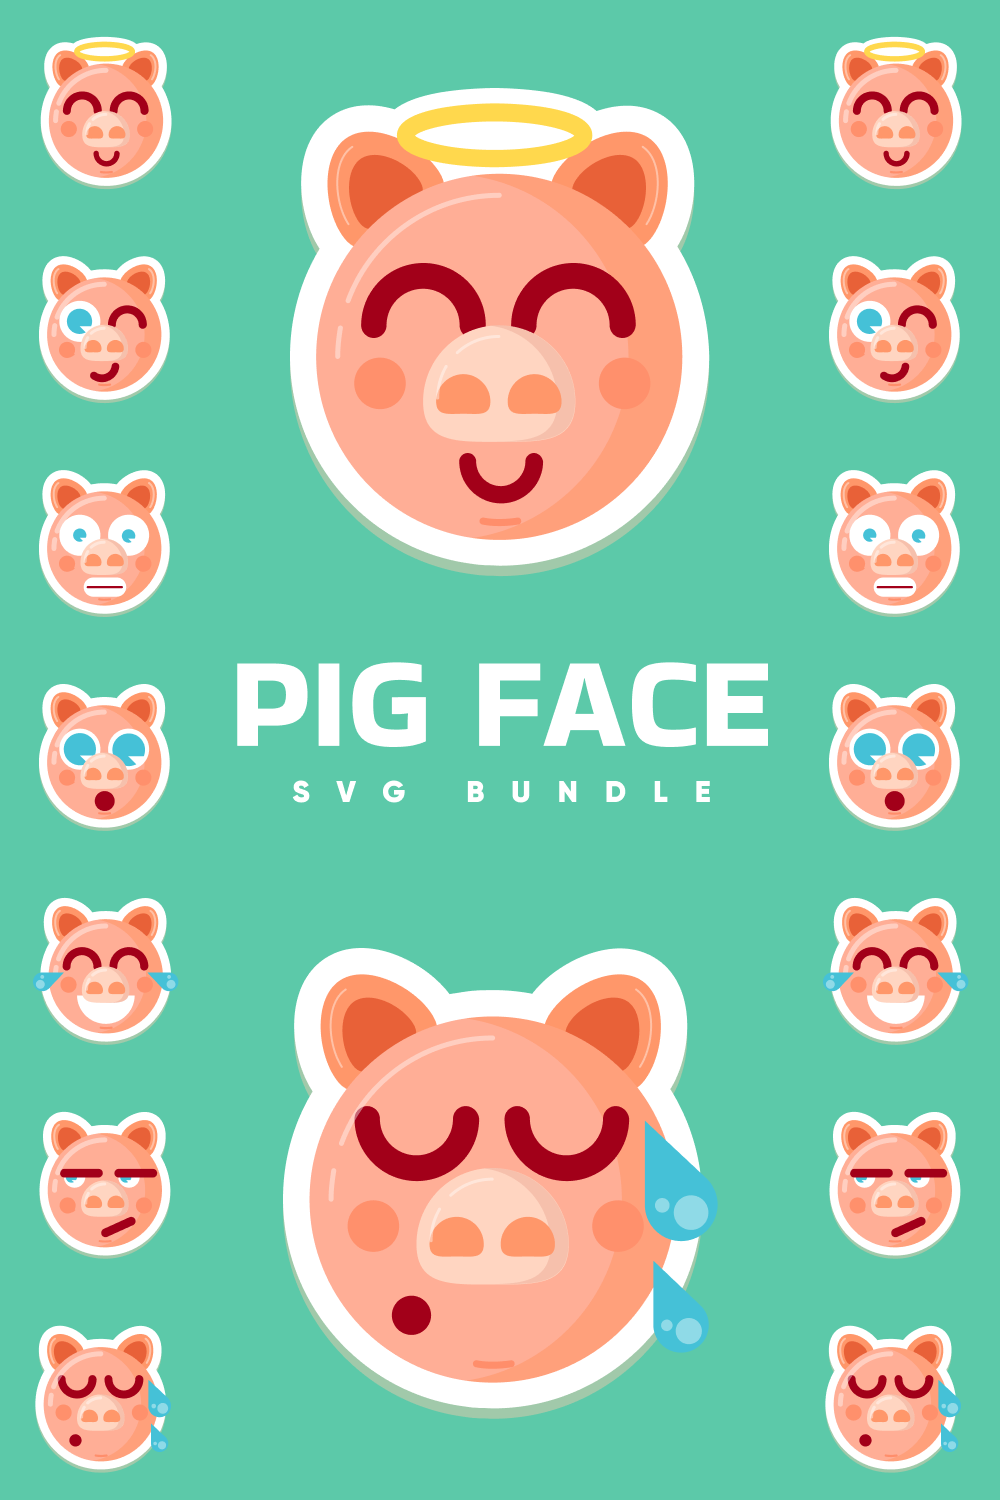 Pig face with many different facial expressions.